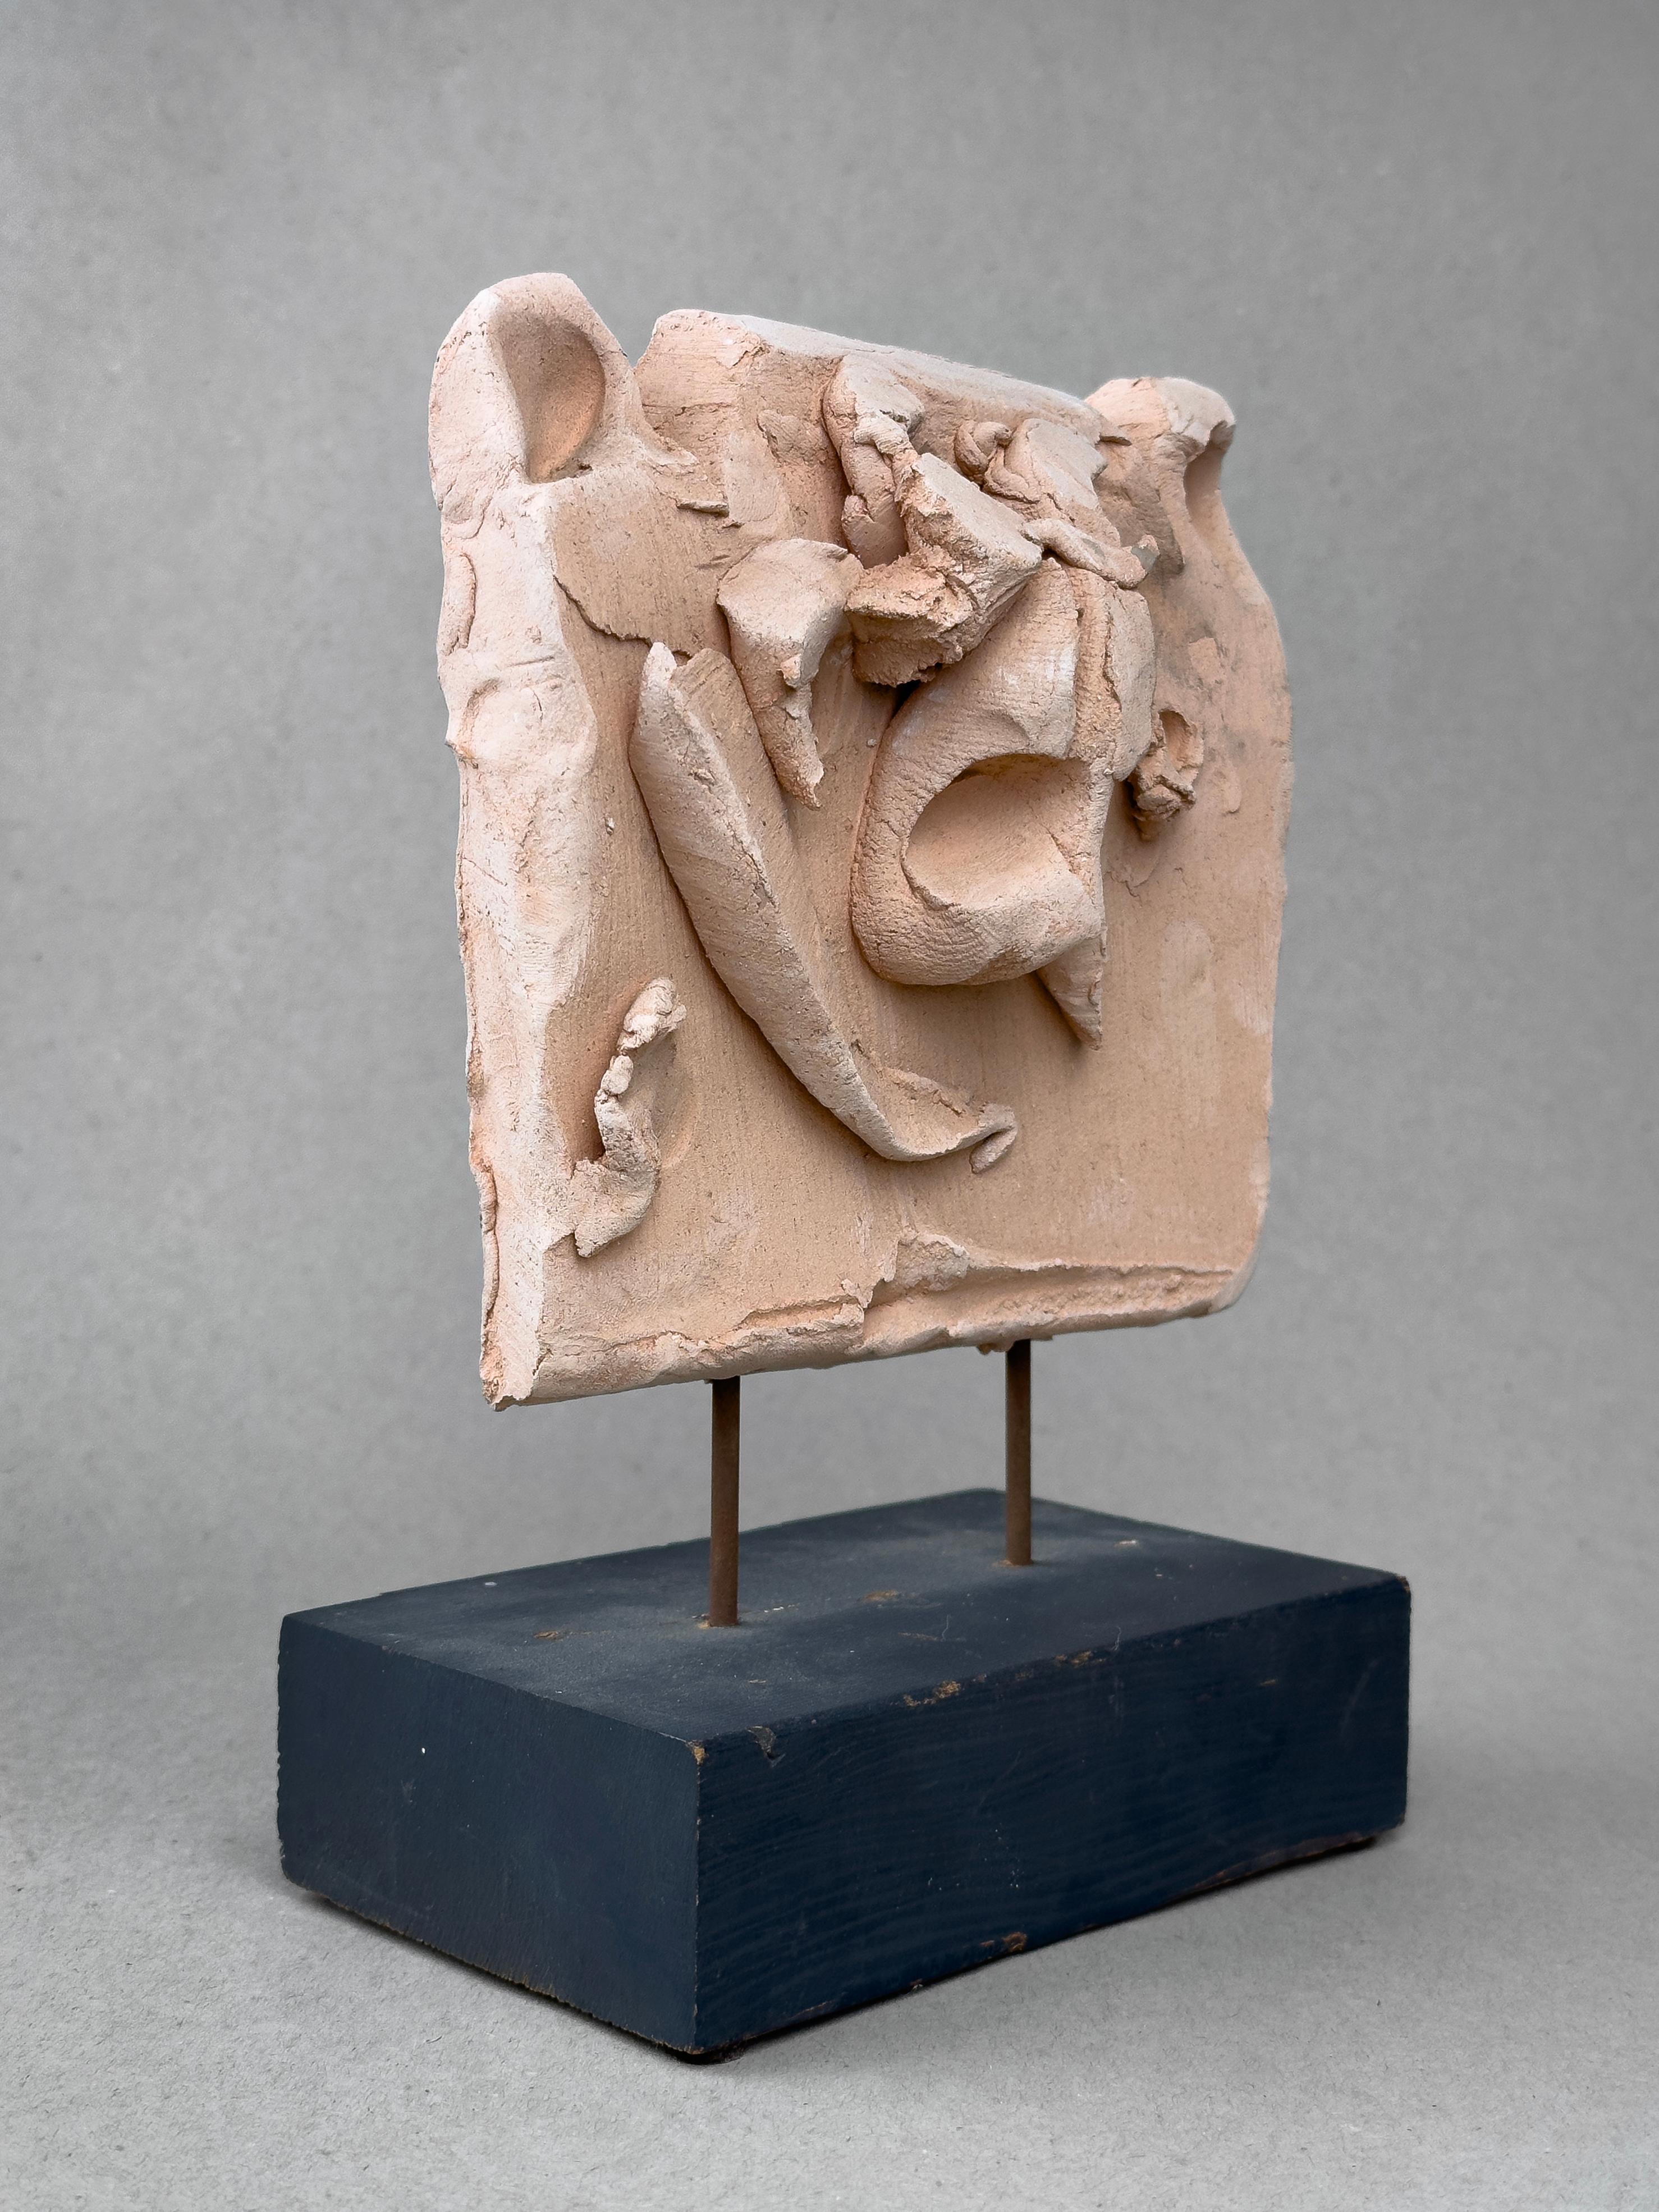 EMERSON WOELFFER
Abstract Form No. 2
1979

Terra cotta on wooden plinth

3.5 x 5.5 x 8.5 inches